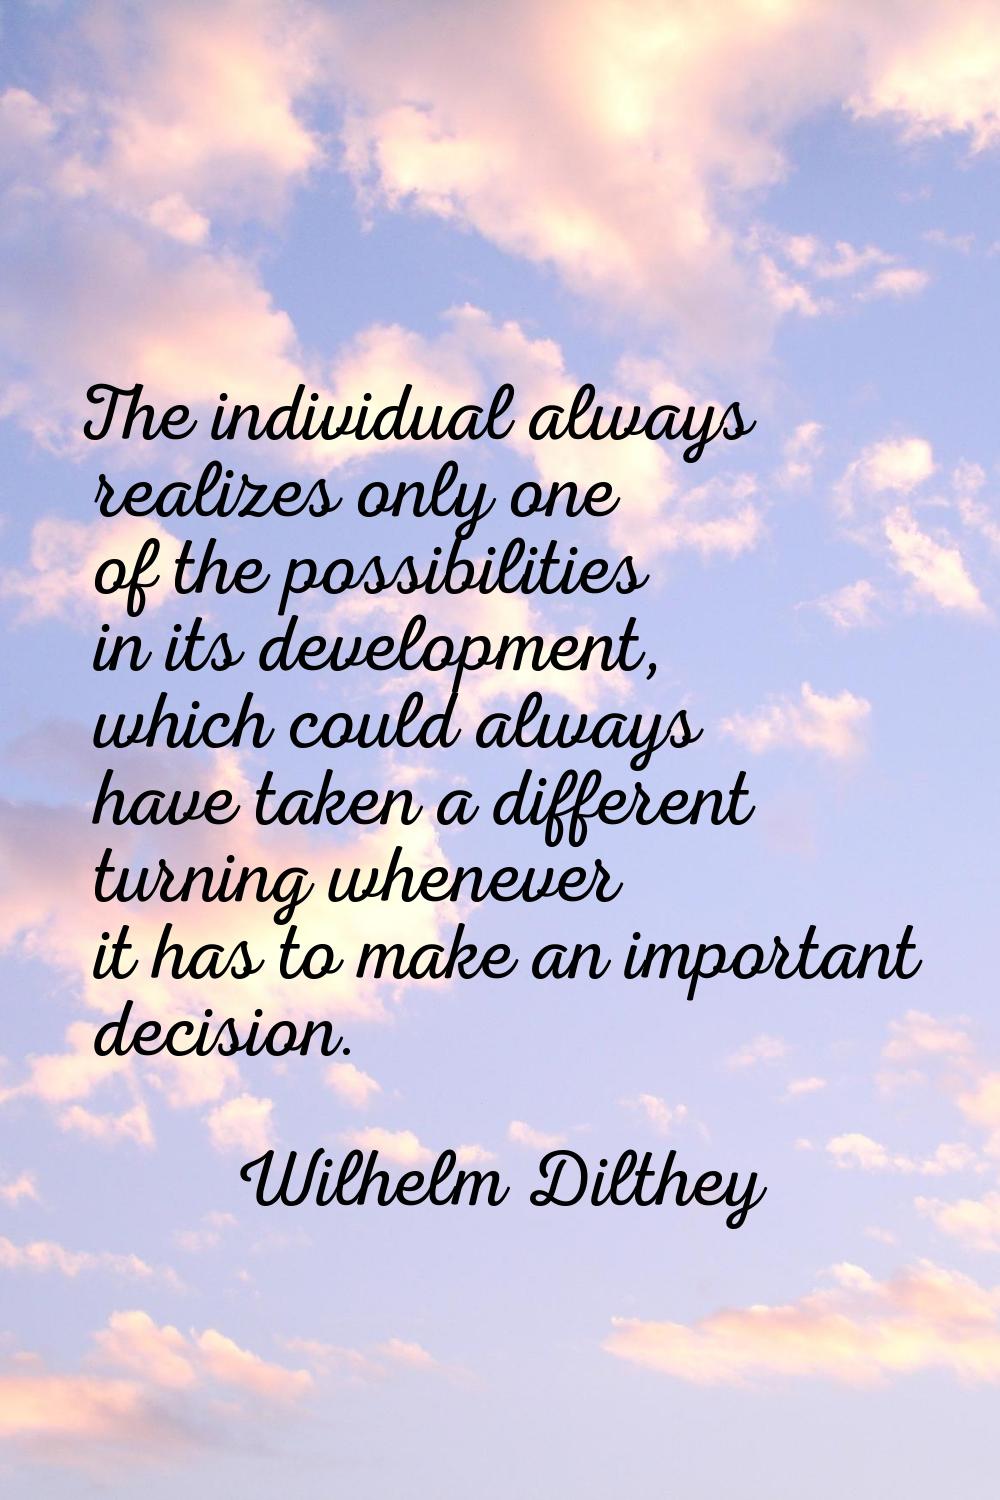 The individual always realizes only one of the possibilities in its development, which could always